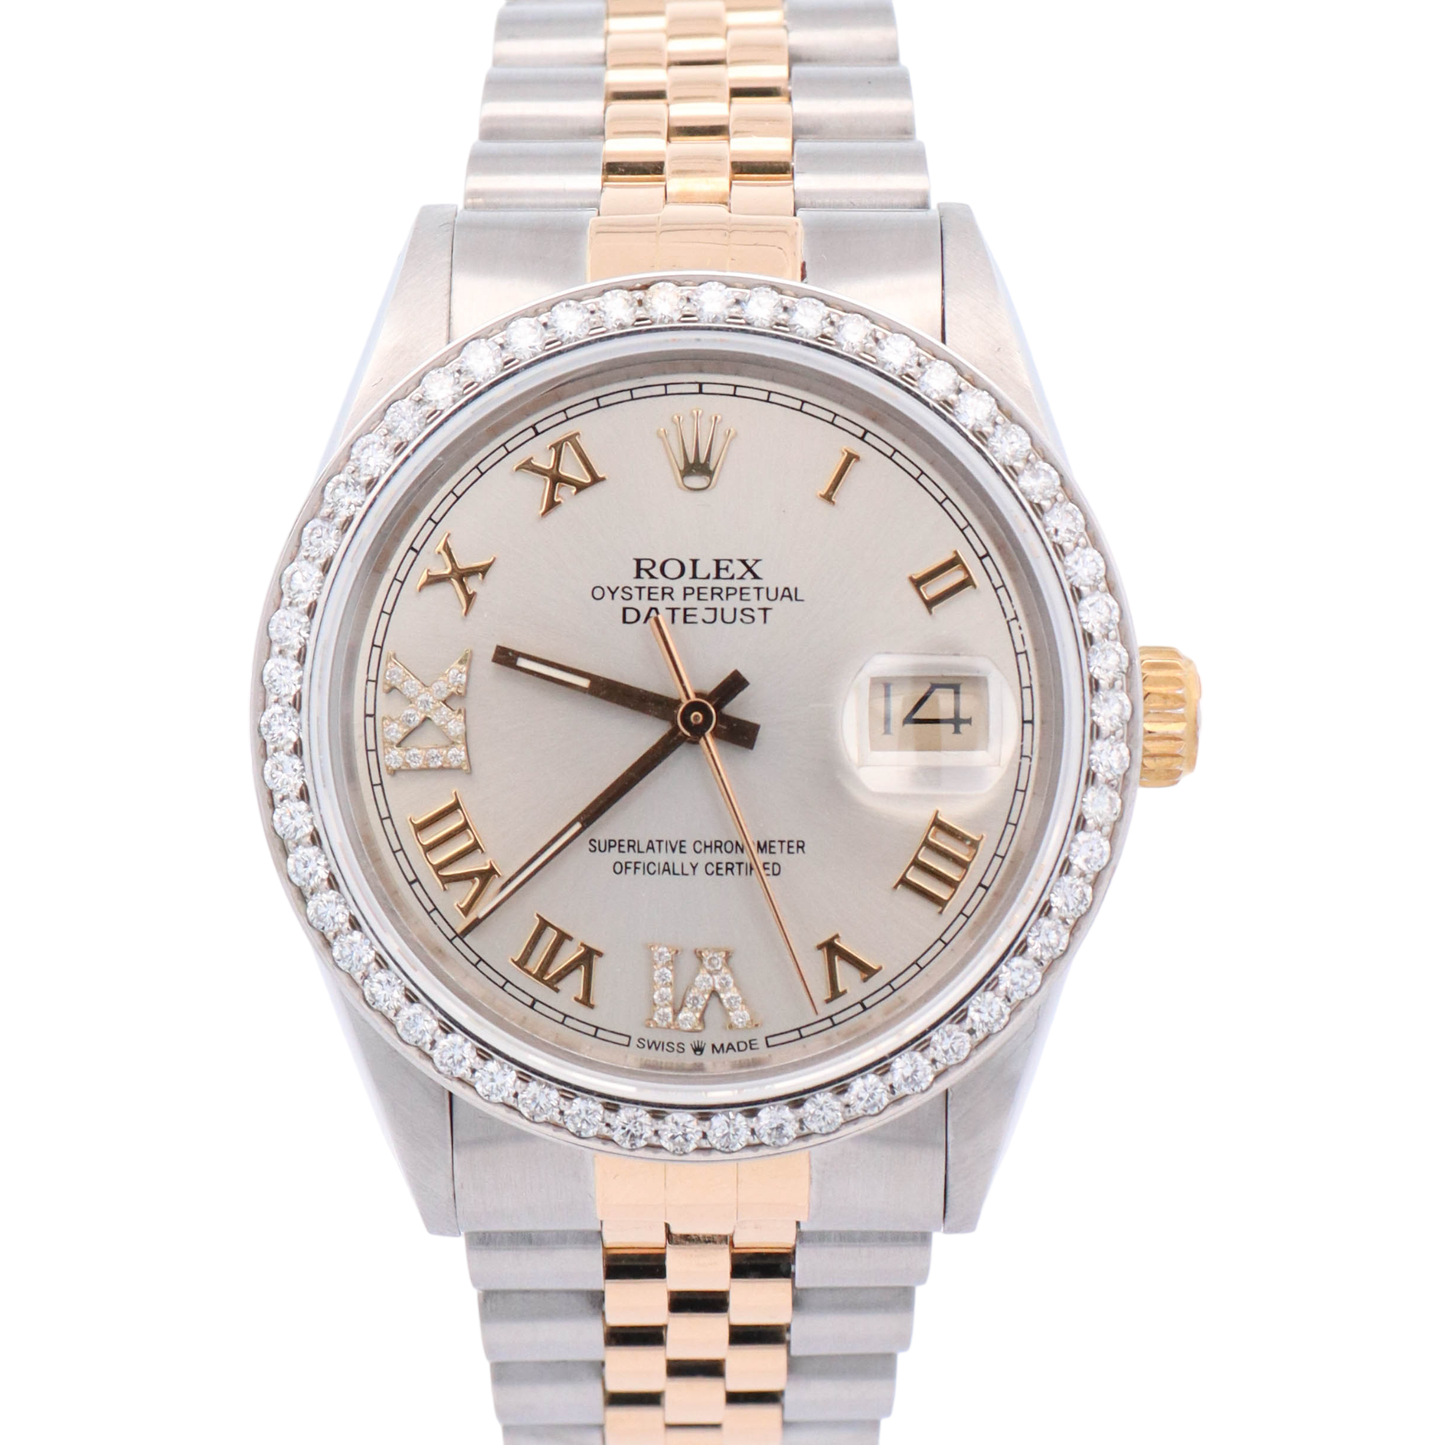 Rolex Datejust Two-Tone Stainless Steel & Yellow Gold 36mm Silver Roman Diamond #6 & #9 Dial Watch Reference #: 16013 - Happy Jewelers Fine Jewelry Lifetime Warranty